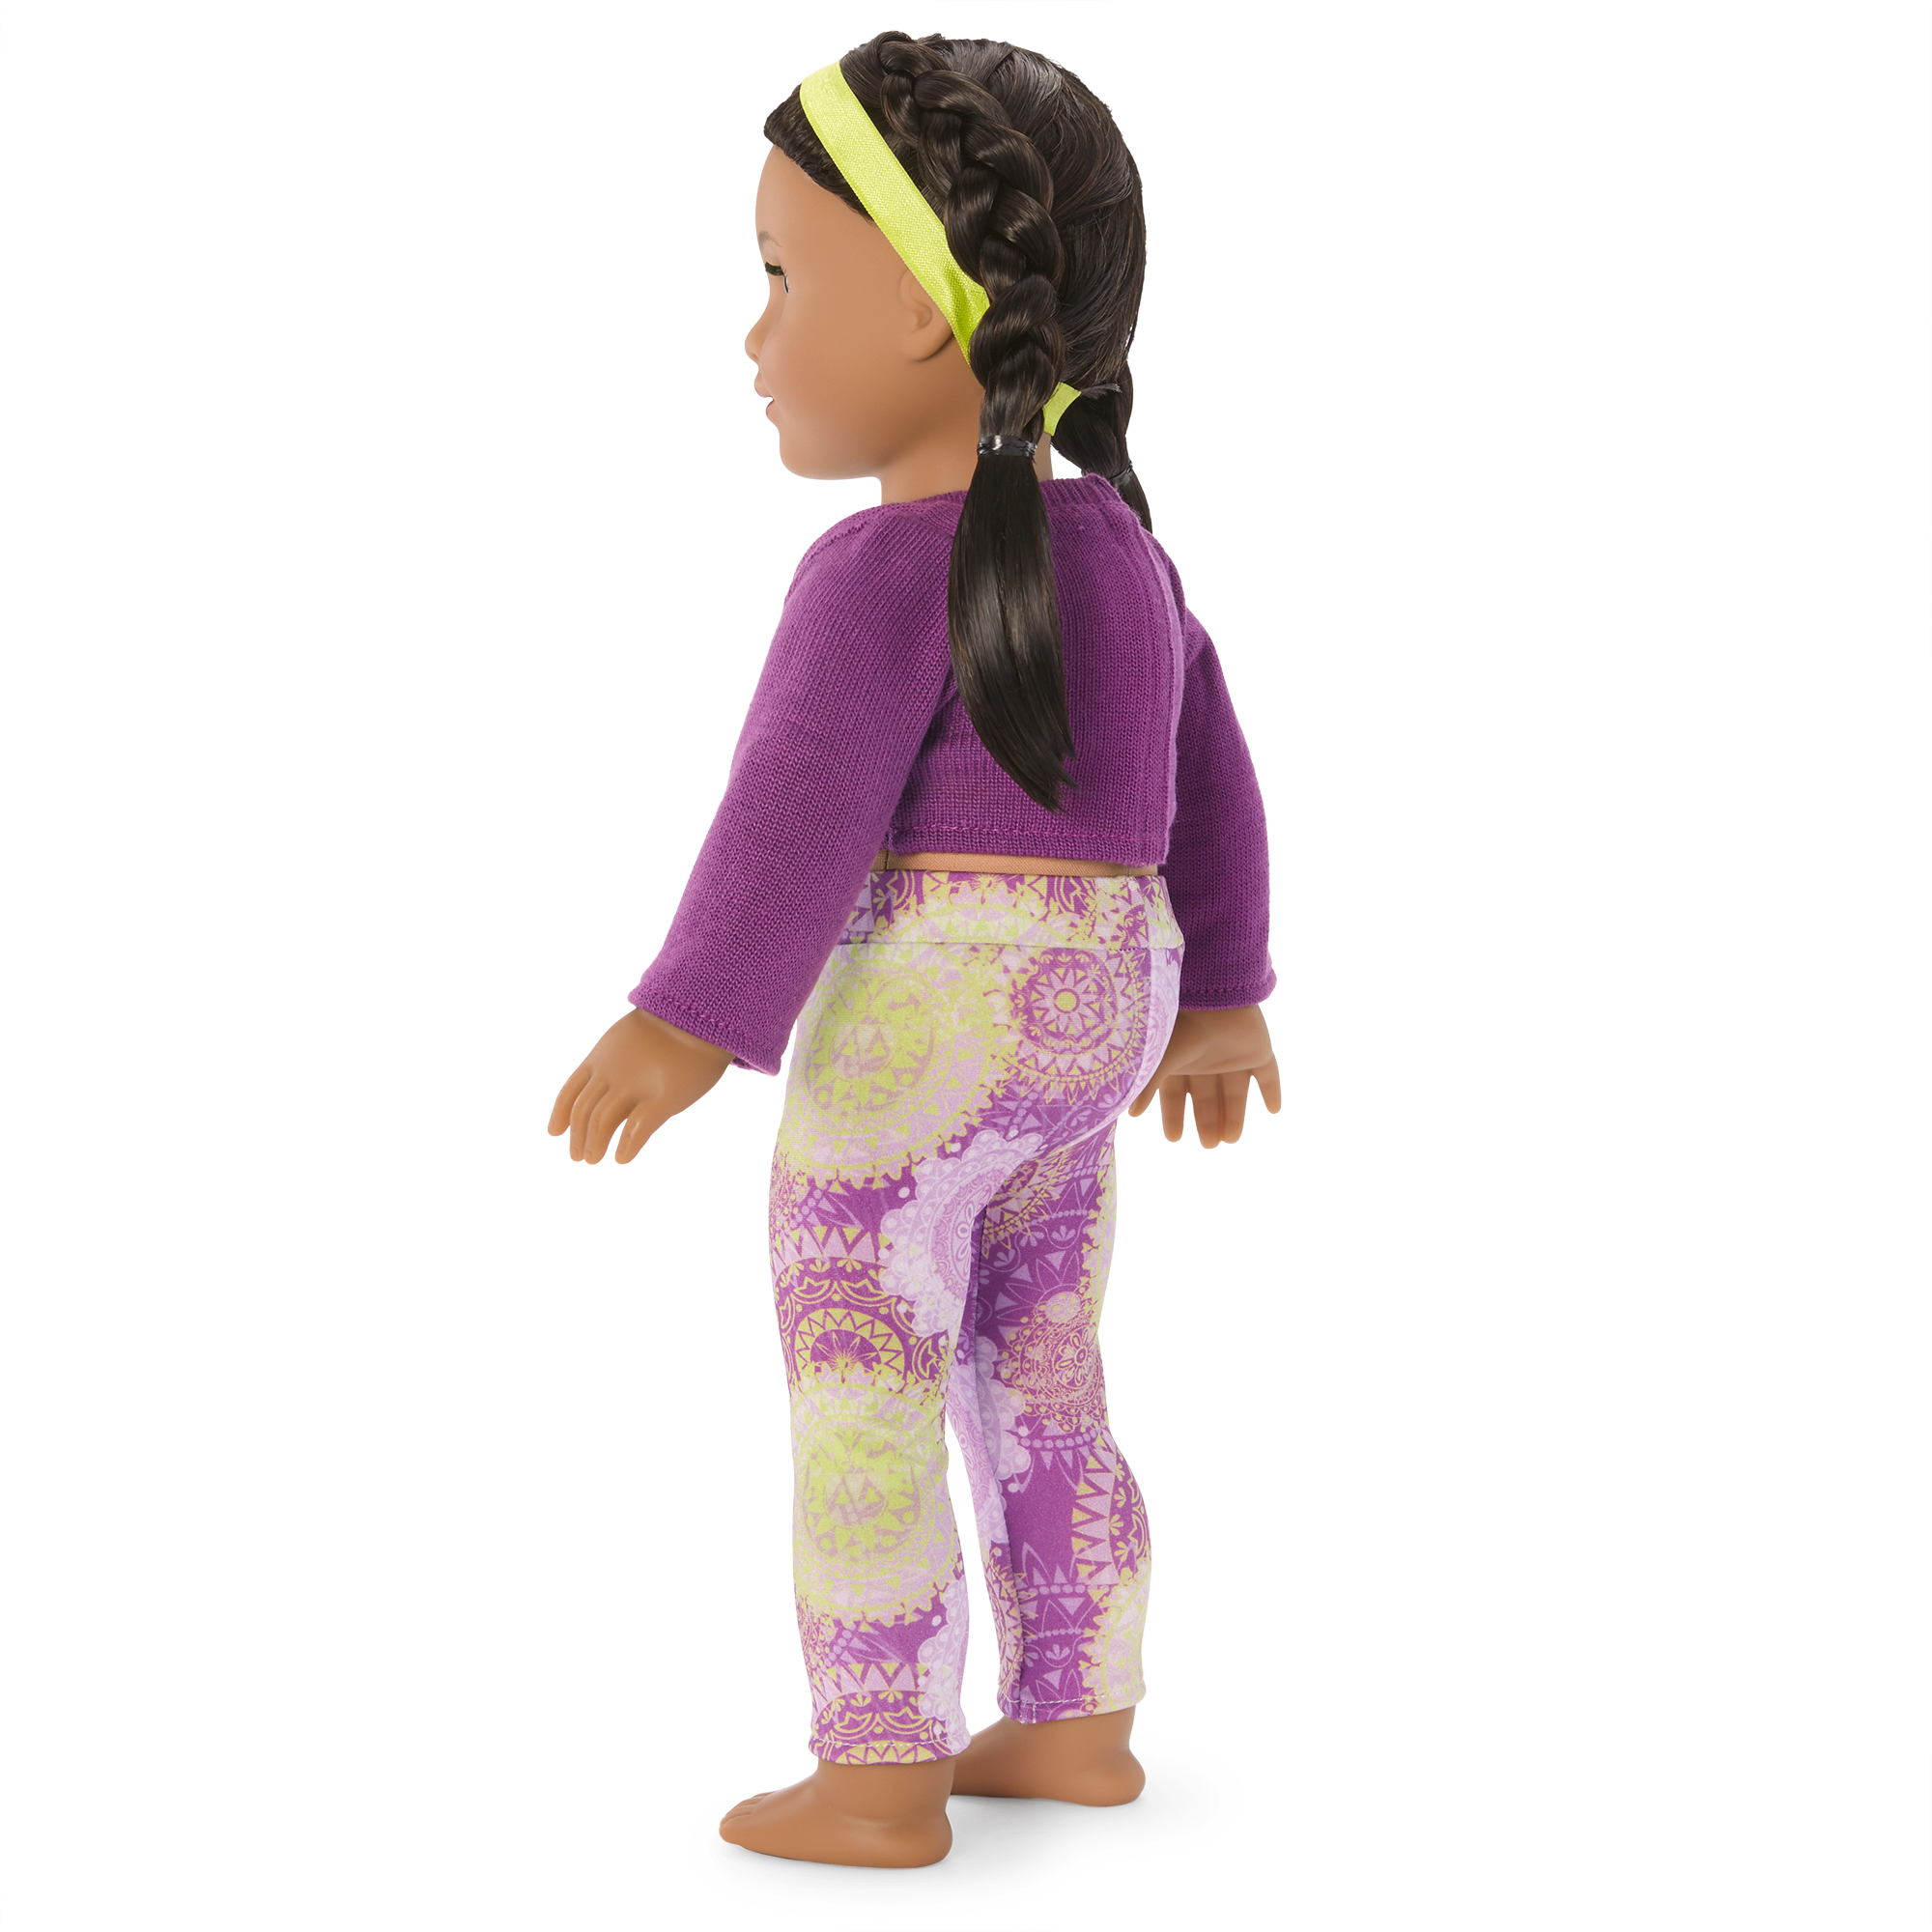 Kavi's™ Yoga Outfit for Dolls | American Girl®